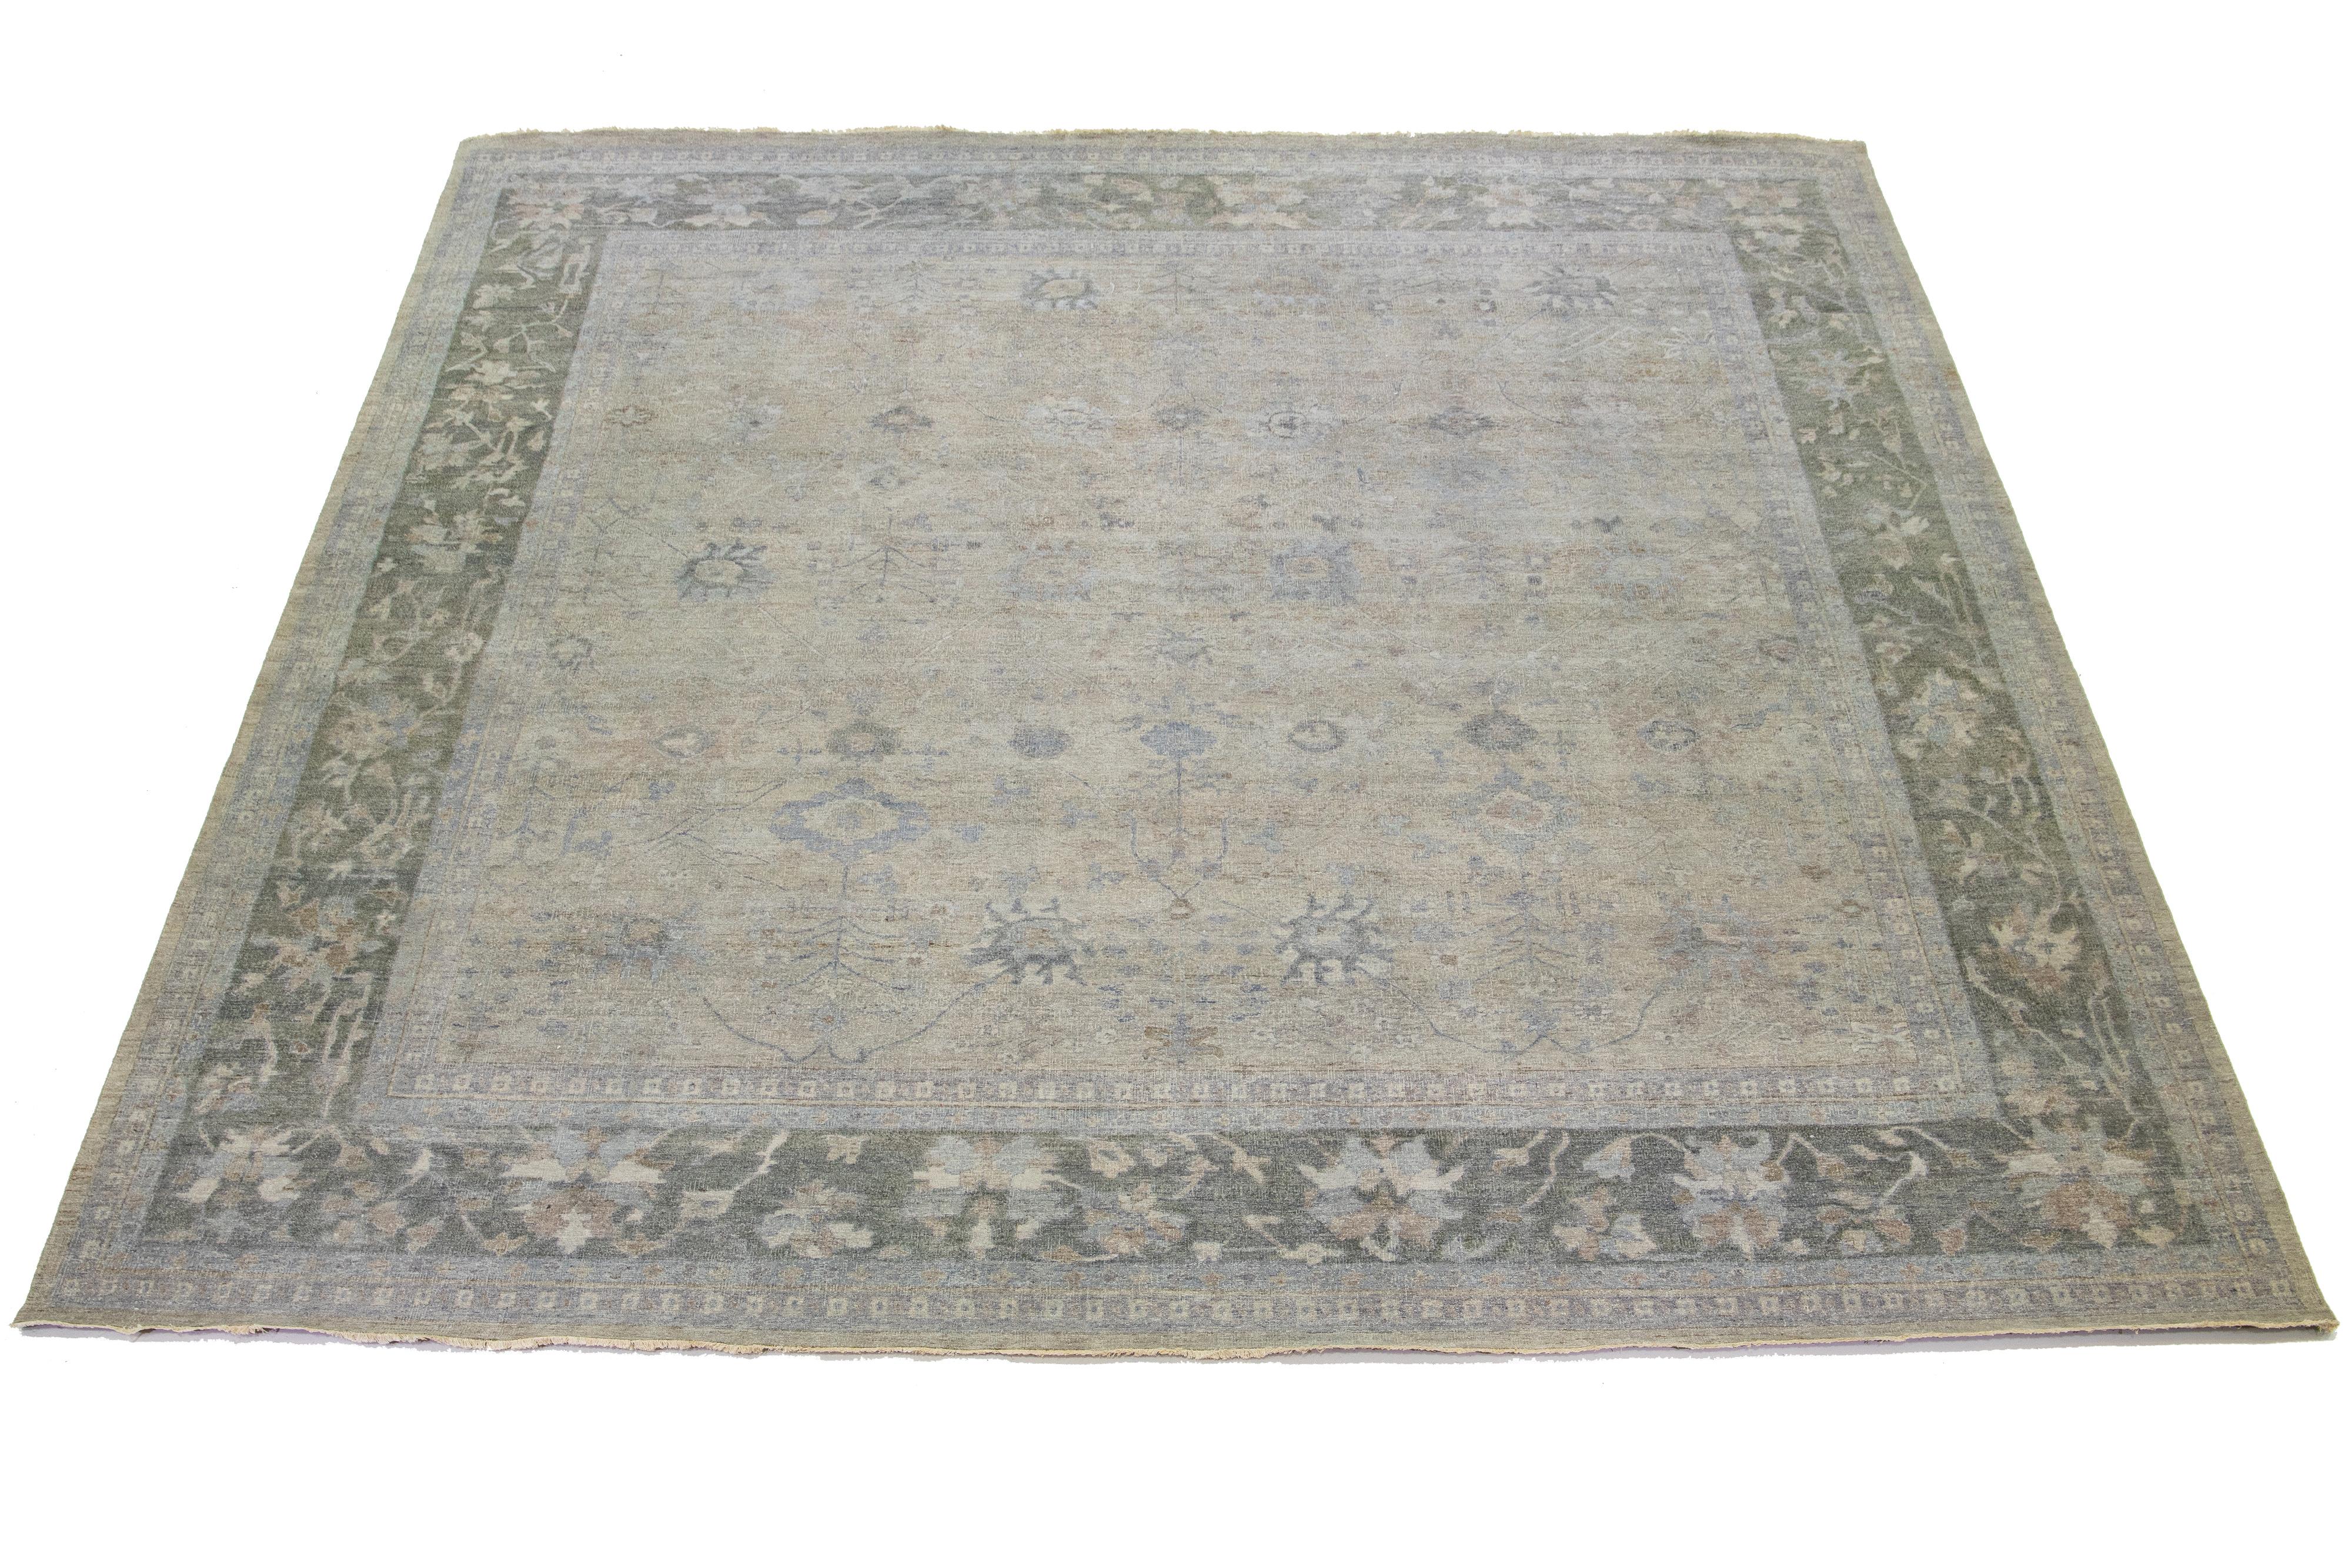 The Artisan line from Apadana brings an exquisite antique style to any space. This hand-knotted square rug showcases a beautiful all-over floral pattern with a gray color scheme and blue and brown accents. It measures 14' 7